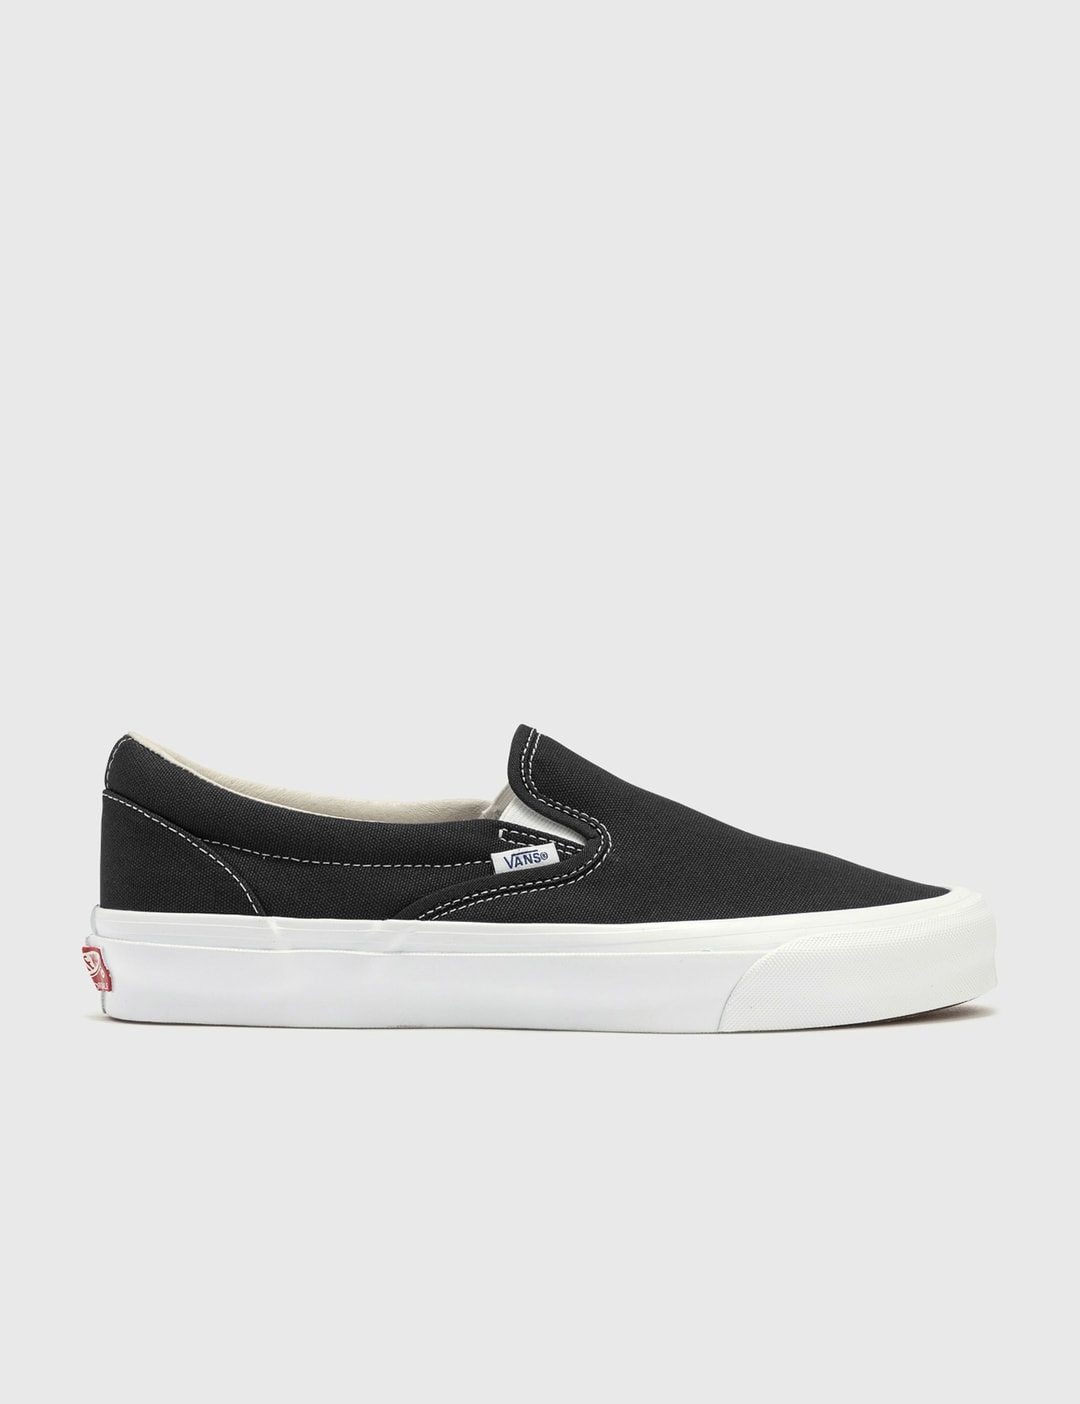 Vans - OG Classic Slip-on | HBX - Globally Curated Fashion and ...